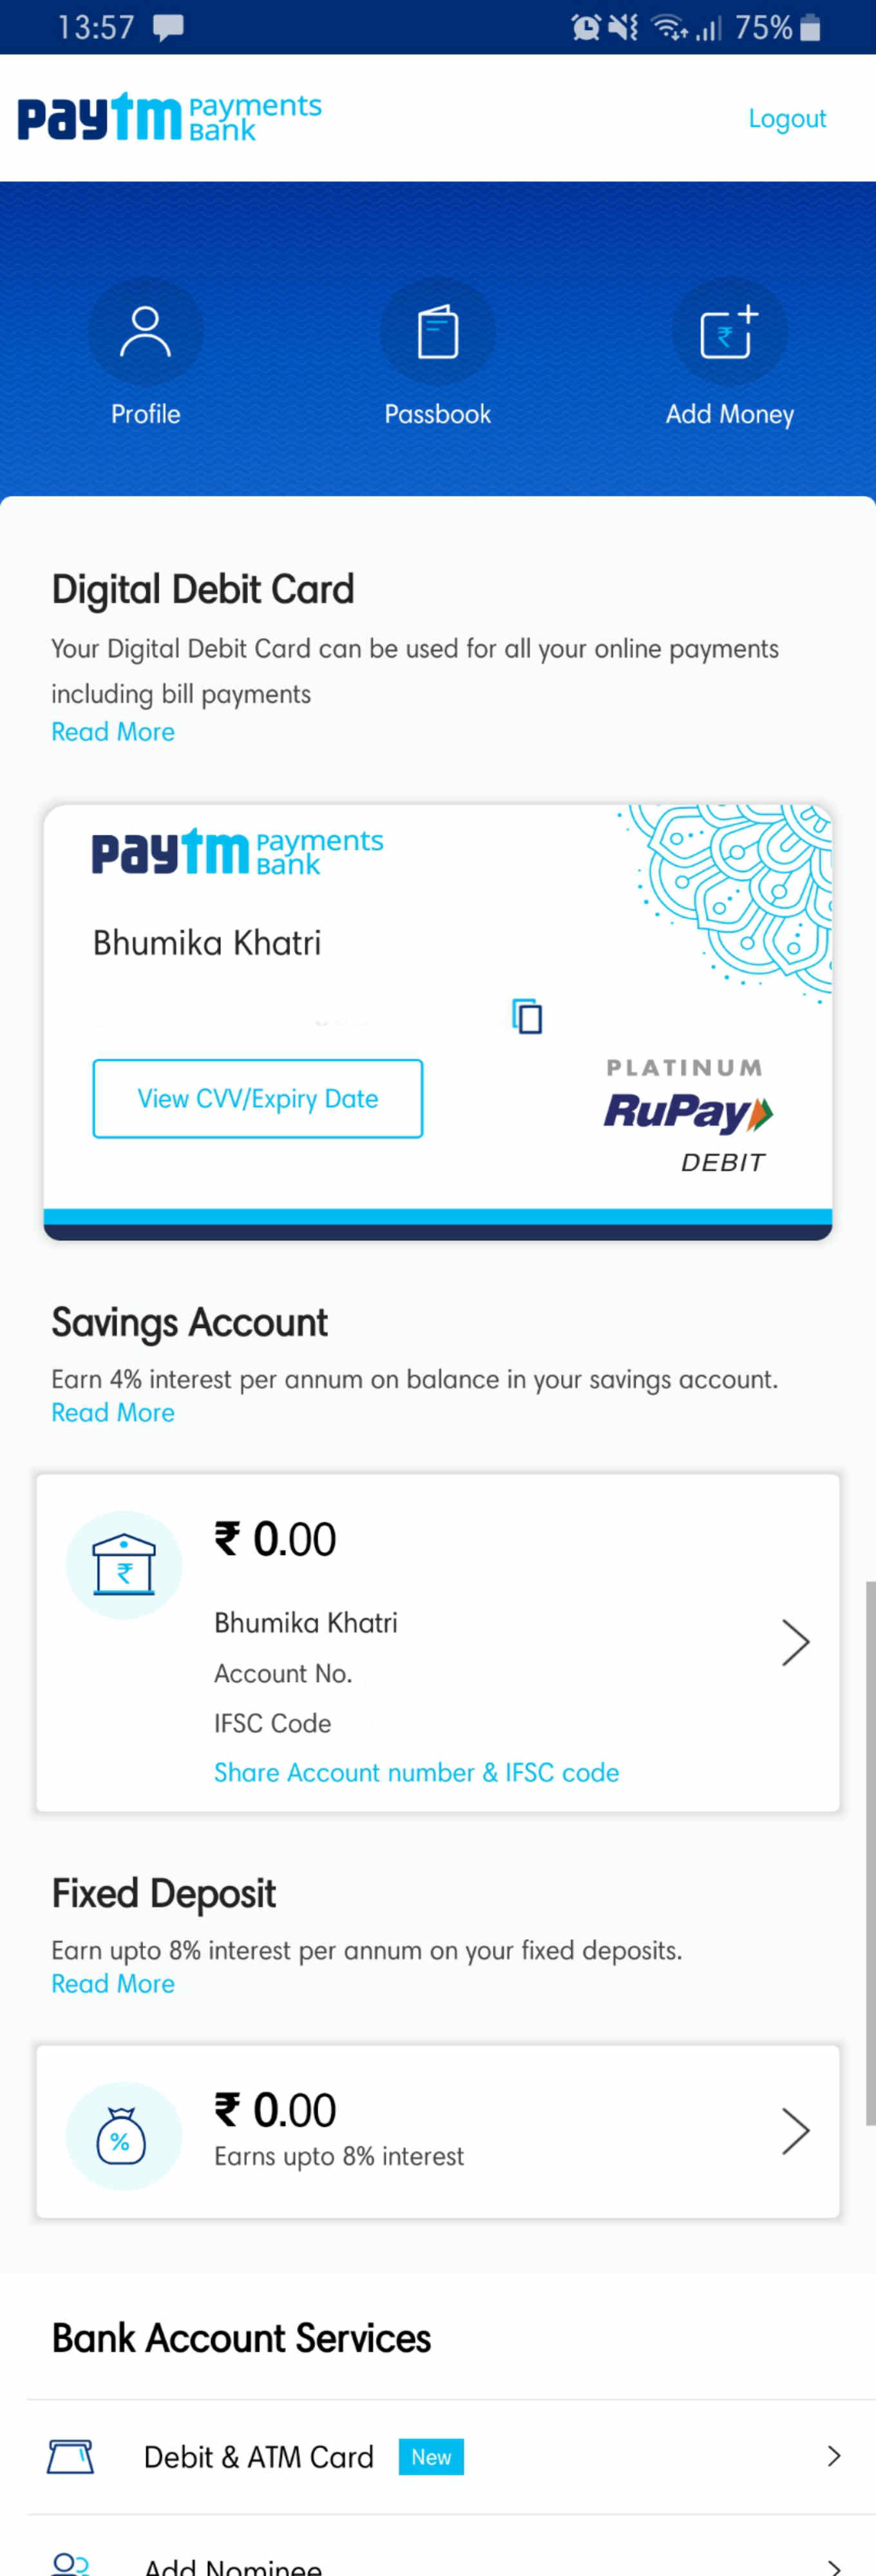 5 Months After RBI Lifts New Customer Ban, Paytm Payments Bank Sees New Legal Hurdle